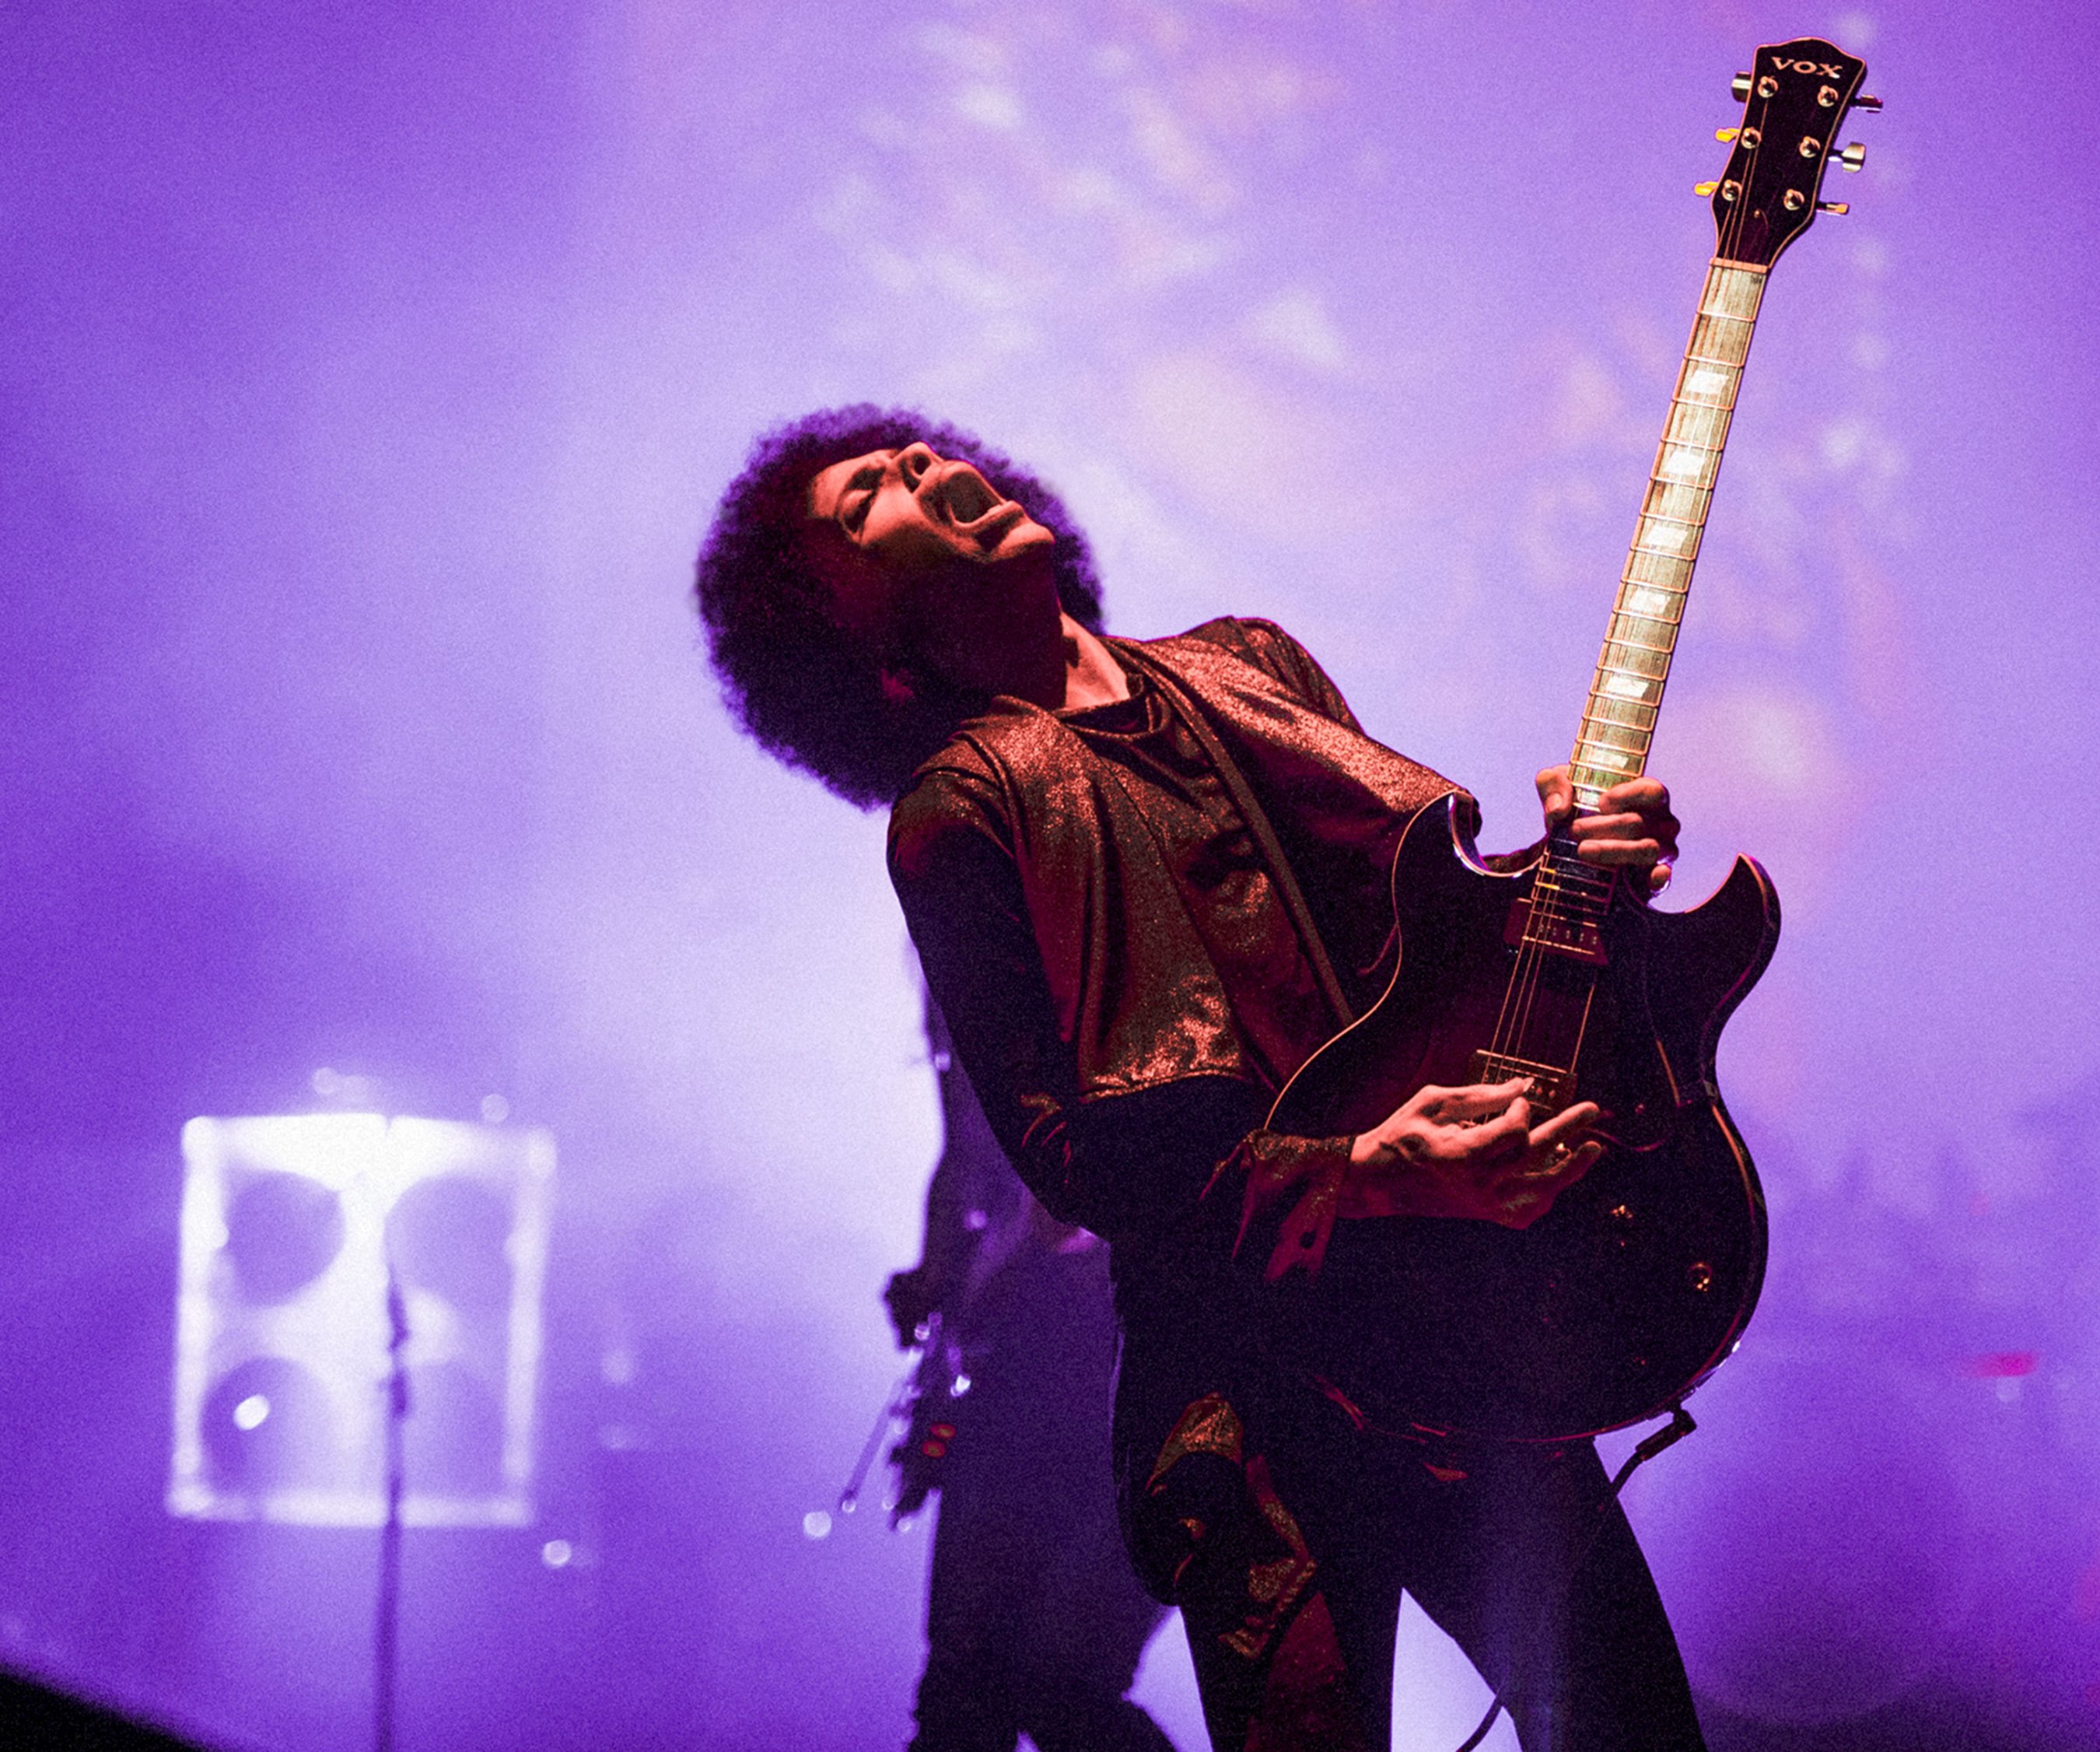 Prince has removed his music from Spotify and other streaming services. Photo: Handout